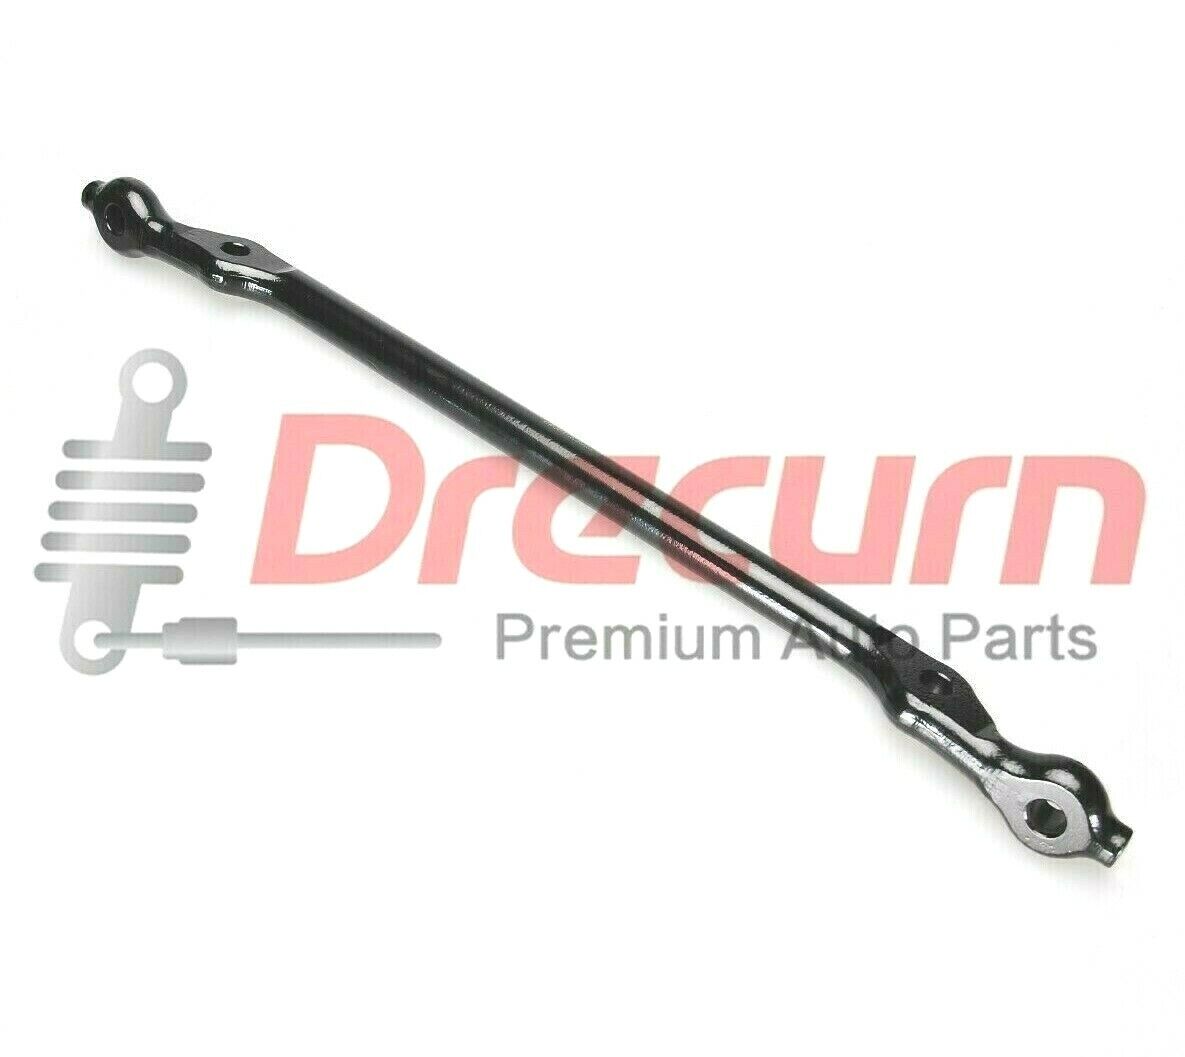 Front Steering Center Link For Chevrolet GMC Pickup Truck SUV 2WD